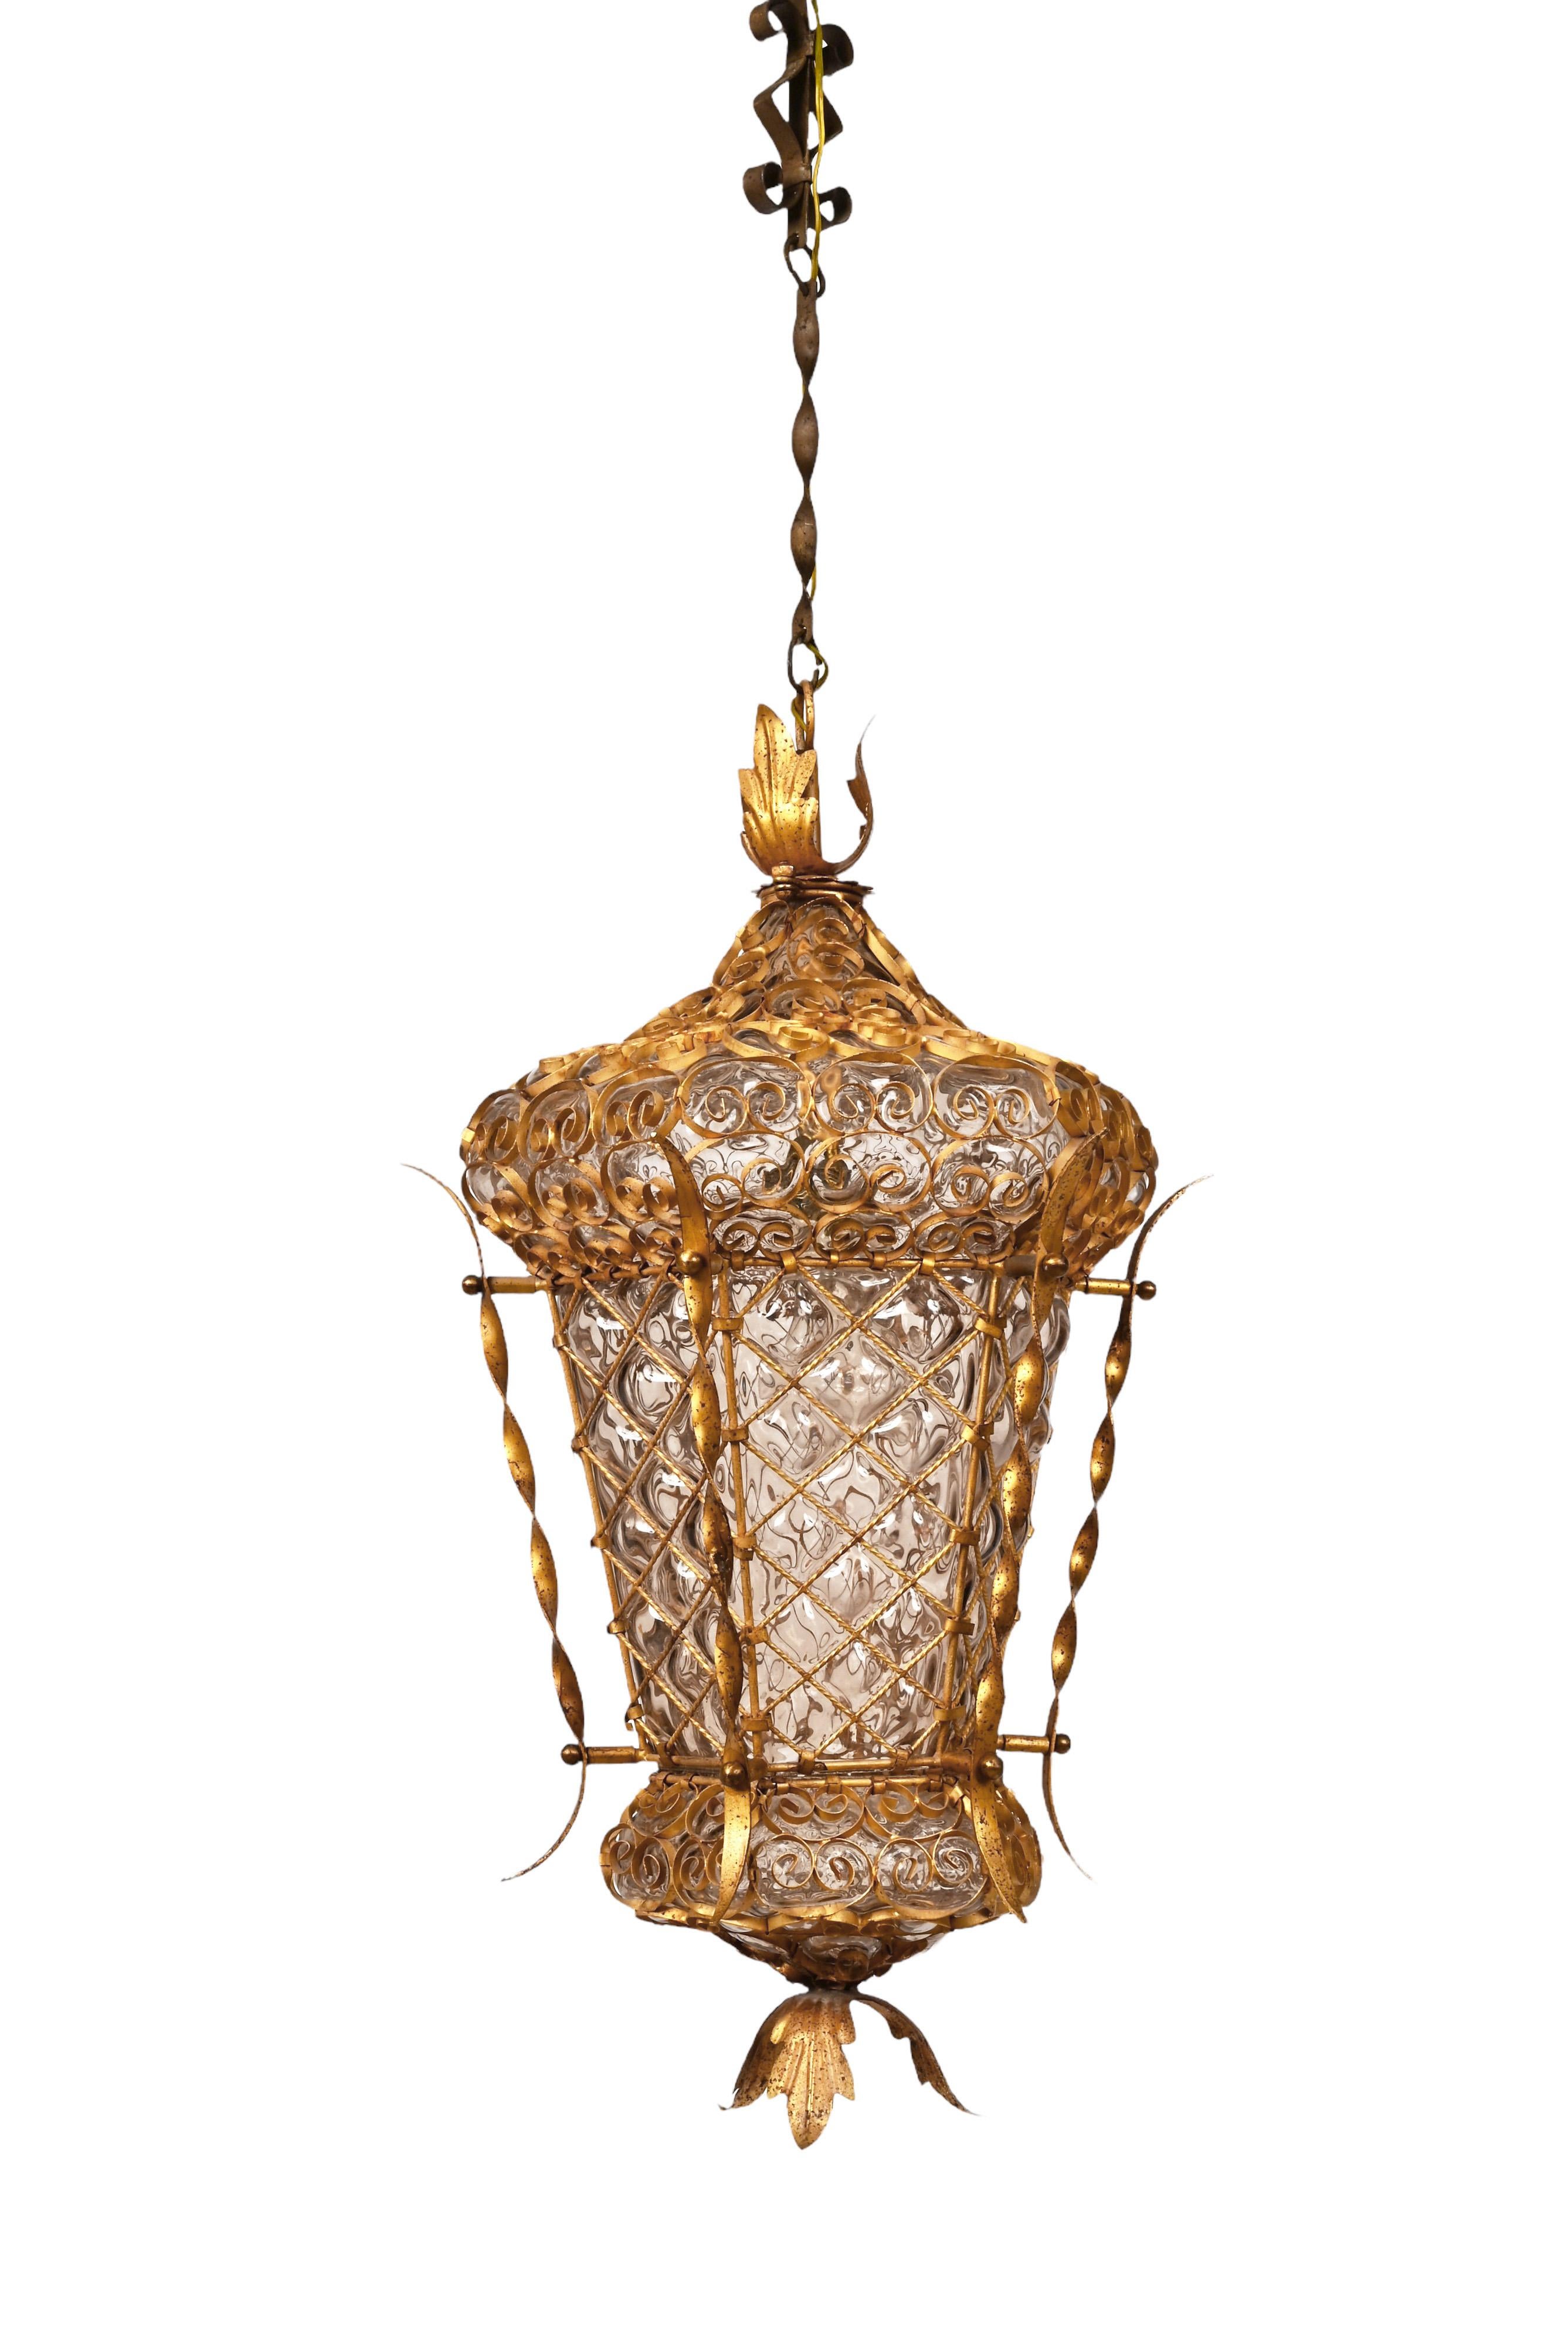 Midcentury Venetian Mouth Blown Glass in Gold Painted Metal Frame Lantern, 1940s For Sale 4